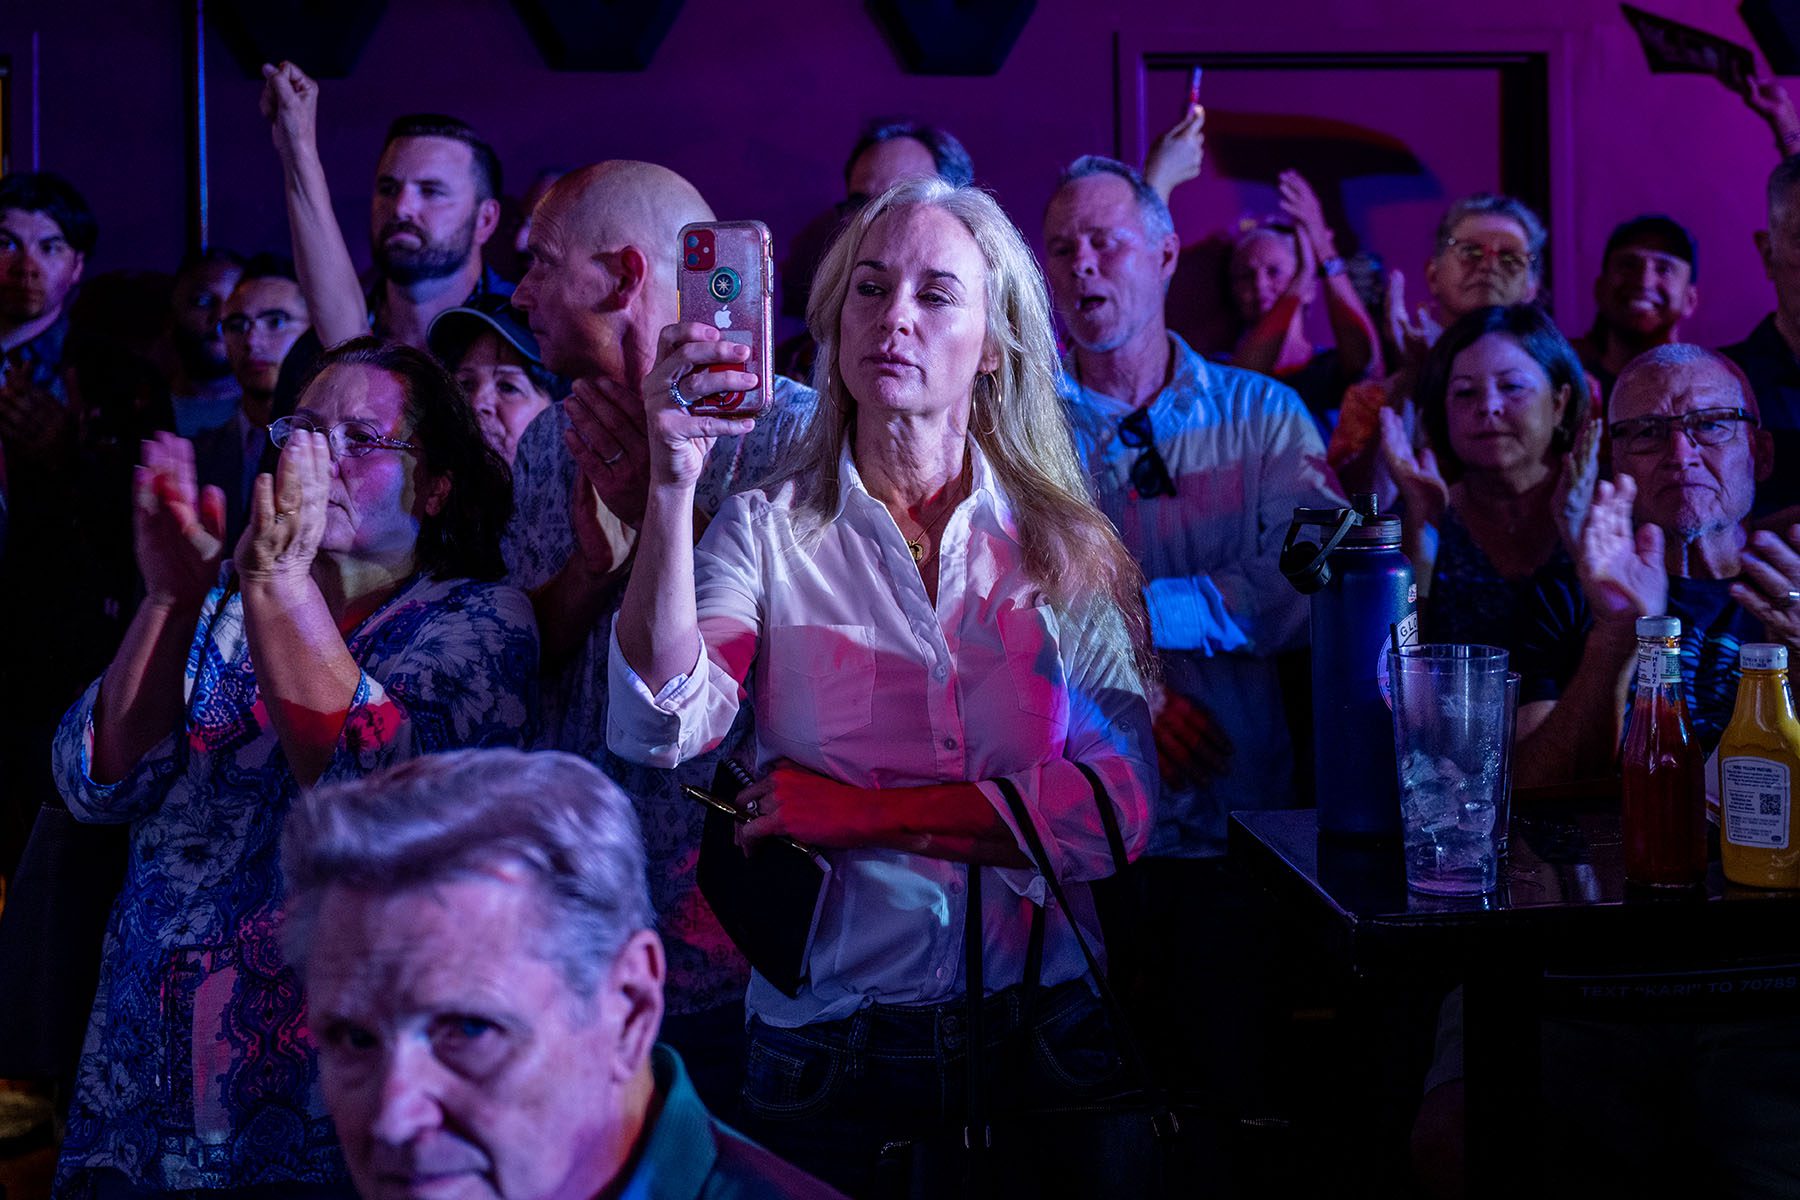 A woman takes a picture with her cellphone during a campaign event for GOP candidates at a restaurant.